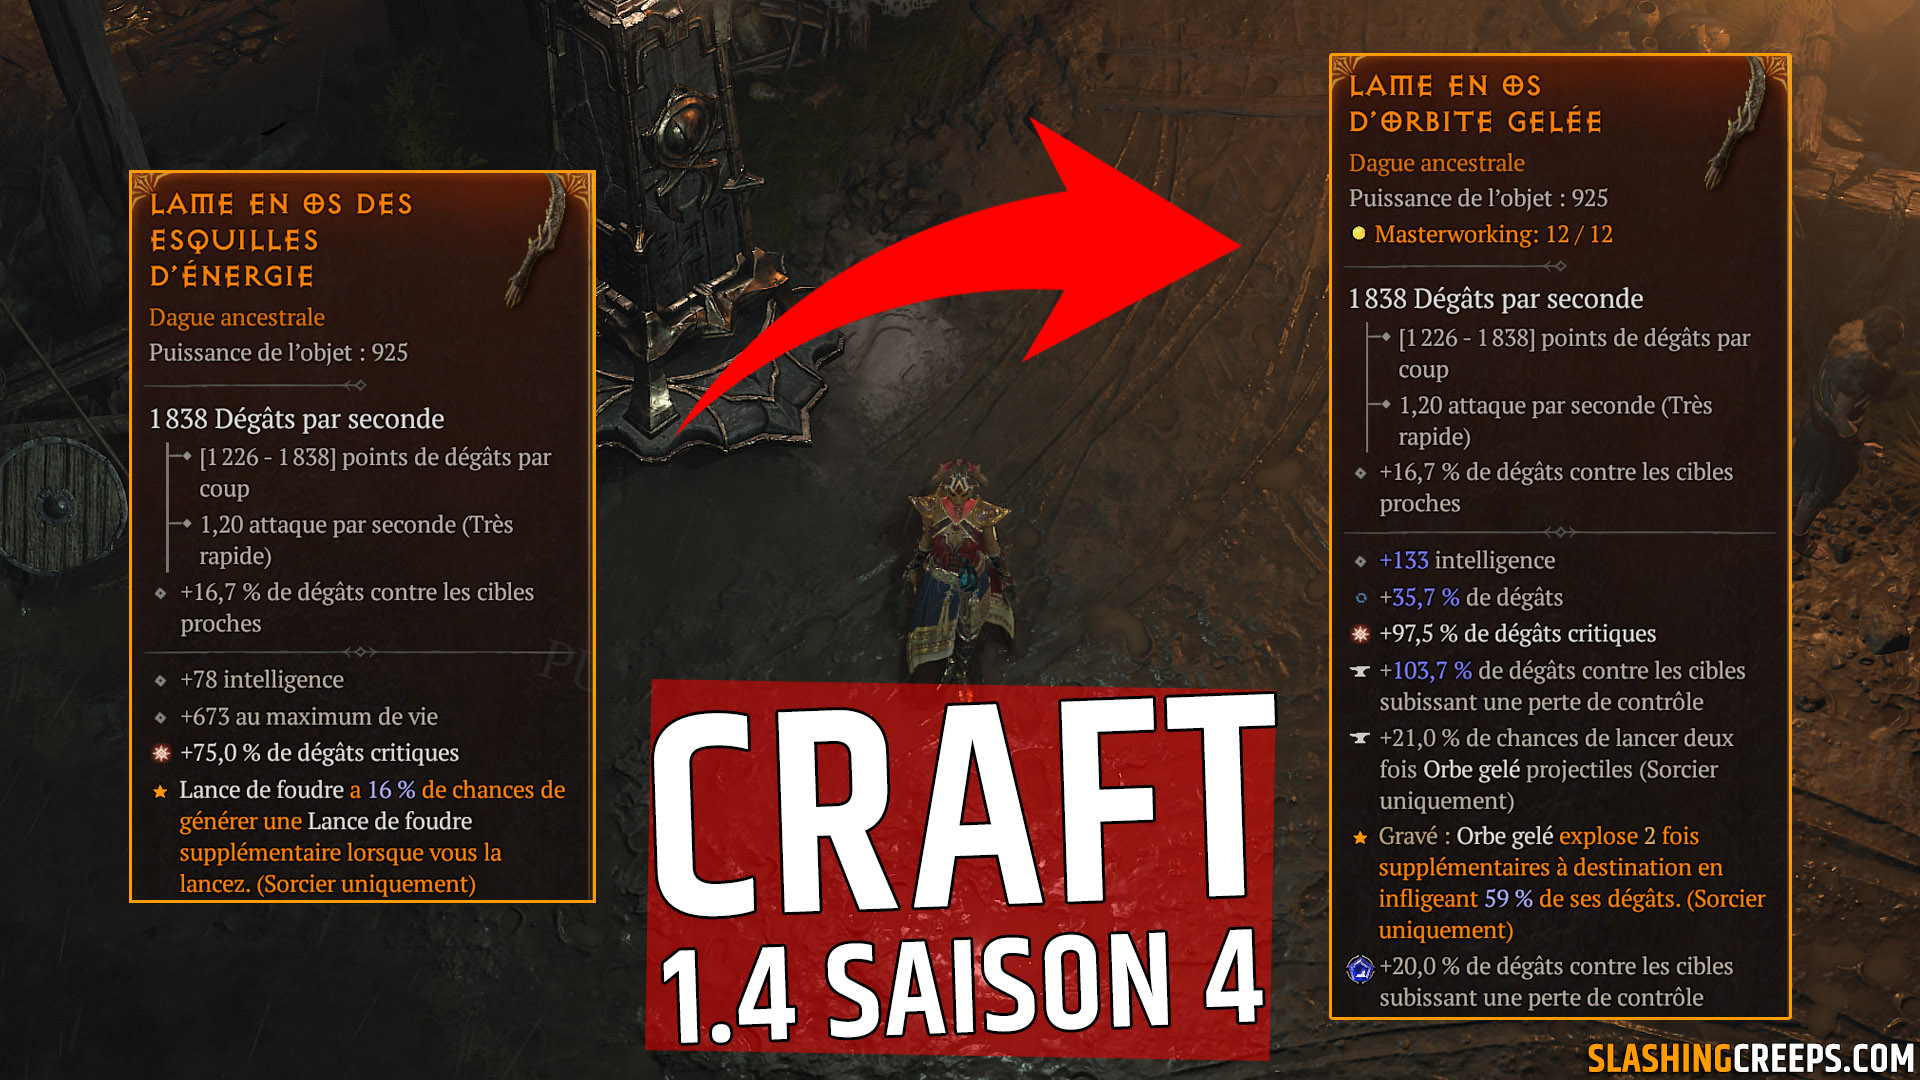 Diablo 4 Patch 1.4 Season 4 Craft Guide! Everything you need to know